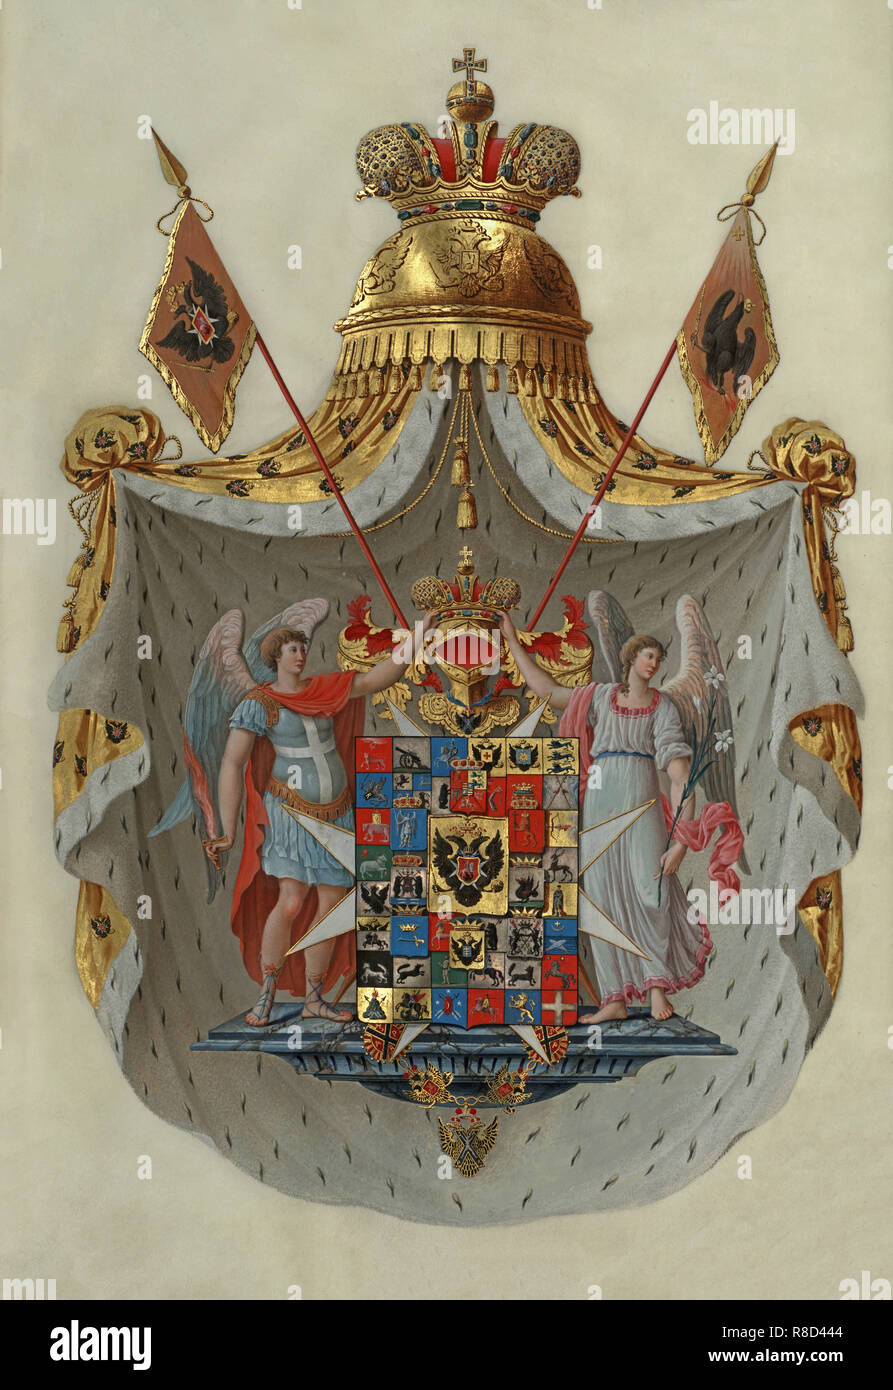 What is the meaning of the Russian Empire's coat of arms? - Quora, russia  flag with coat of arms - thirstymag.com